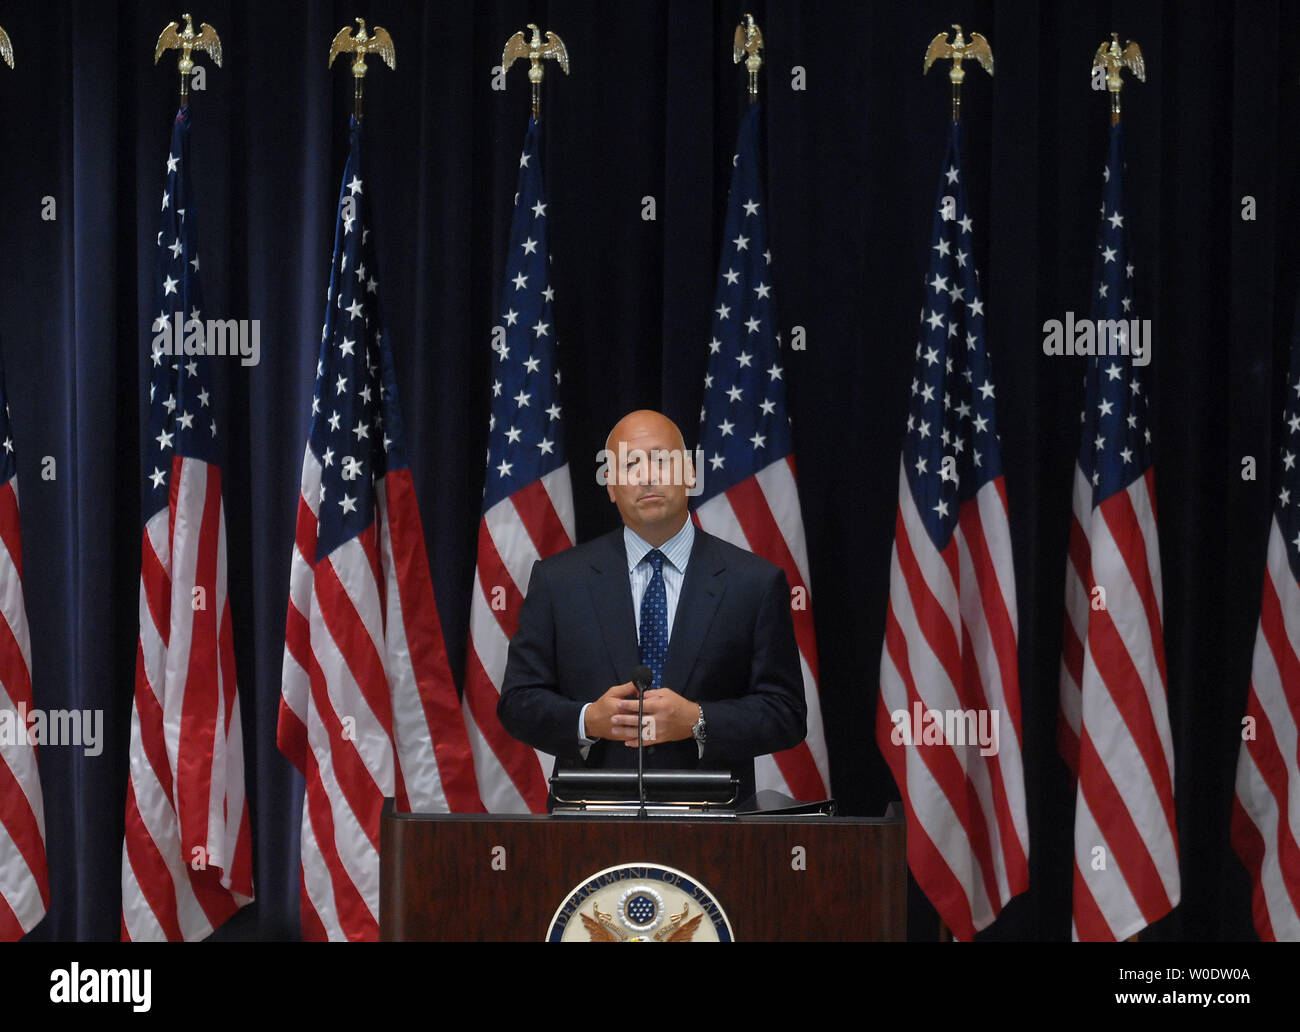 Baseball Hall of Famer Cal Ripken Jr. speaks to the media after being announced as a special sports envoy to the State Department during a ceremony at the State Department in Washington on August 13, 2007. (UPI Photo/Kevin Dietsch) Stock Photo